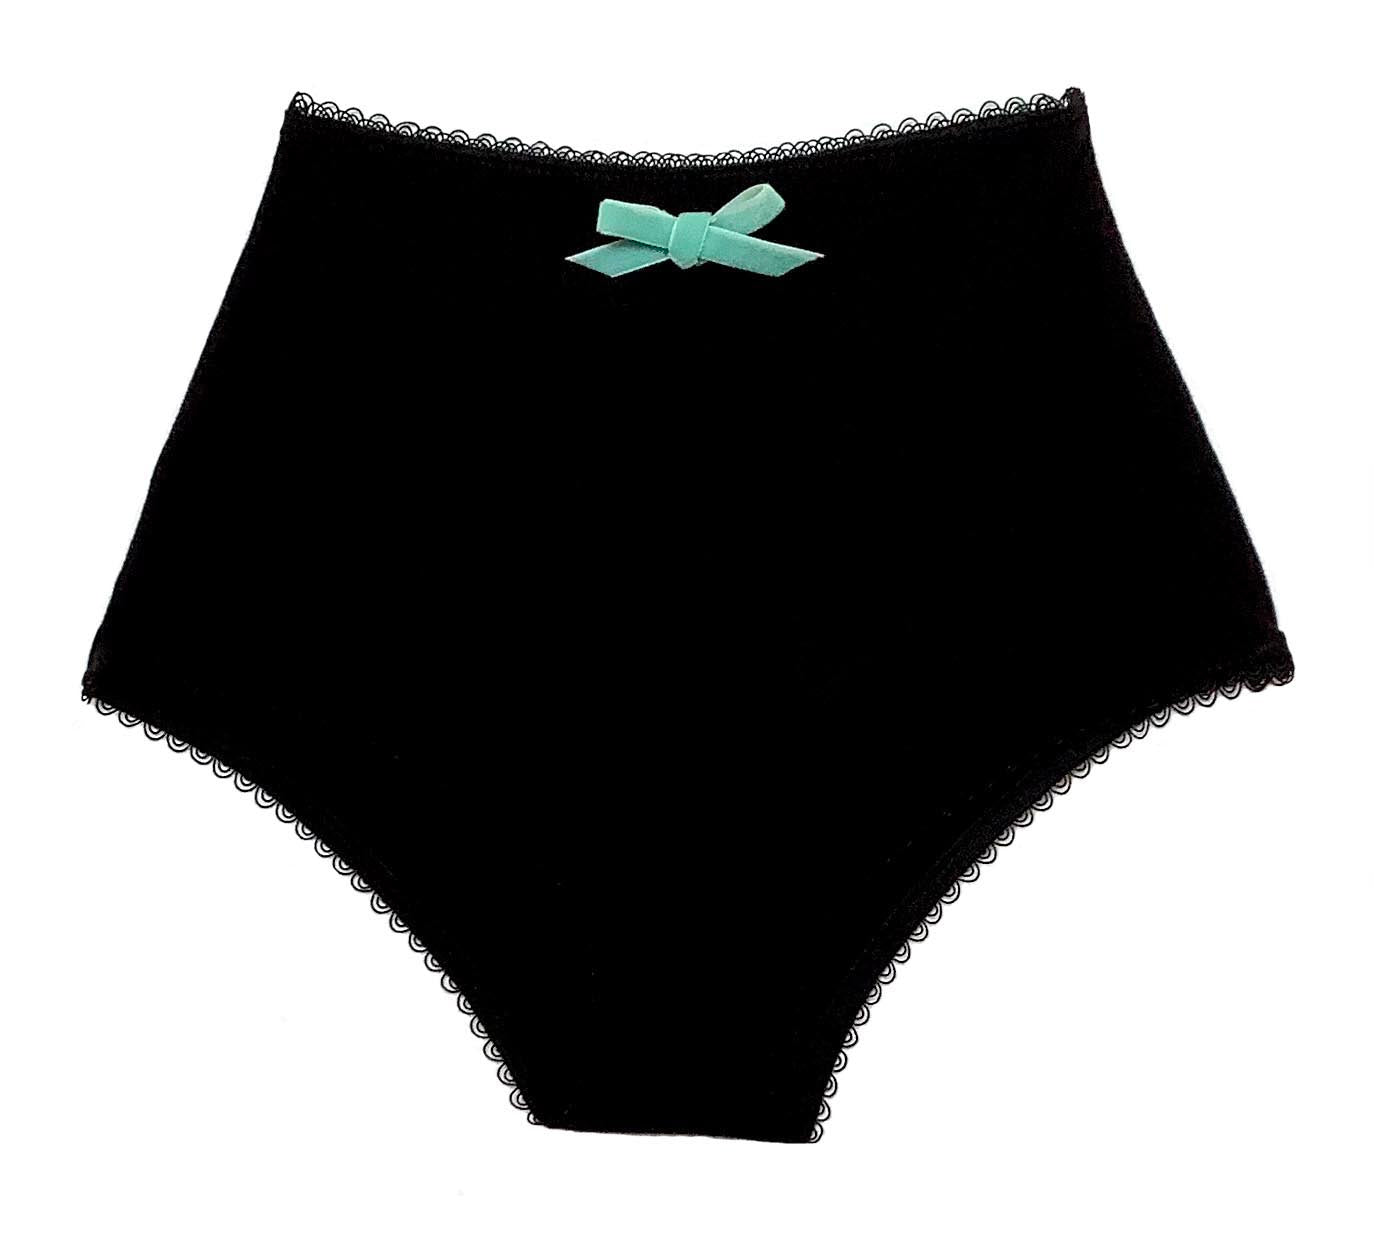 STOCK IN SG] WOMEN BRIEF PANTY PANTIES BAMBOO UNDERWEAR STRETCHABLE  COMFORTABLE